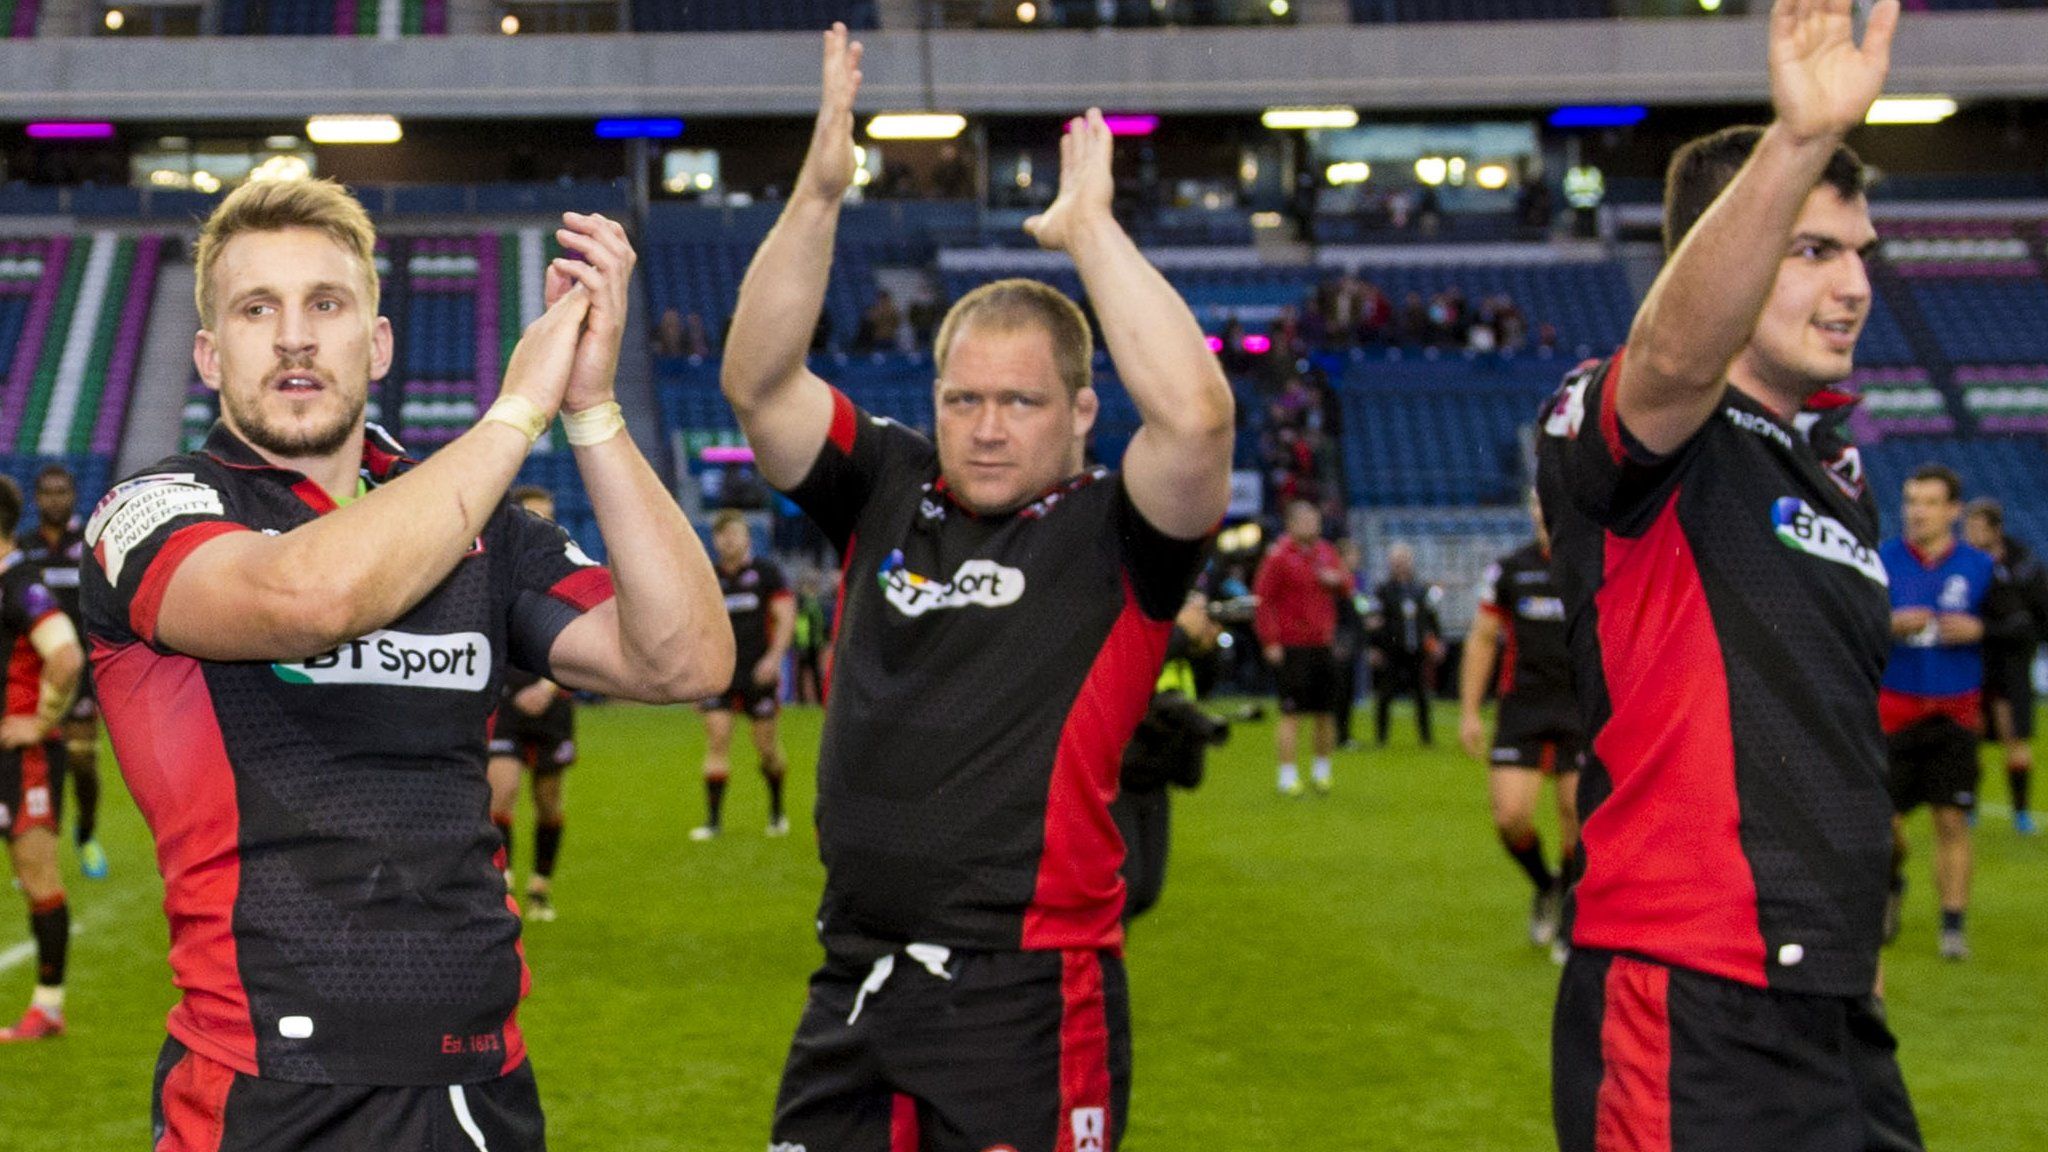 Edinburgh players salute their fans after a thrilling tussle